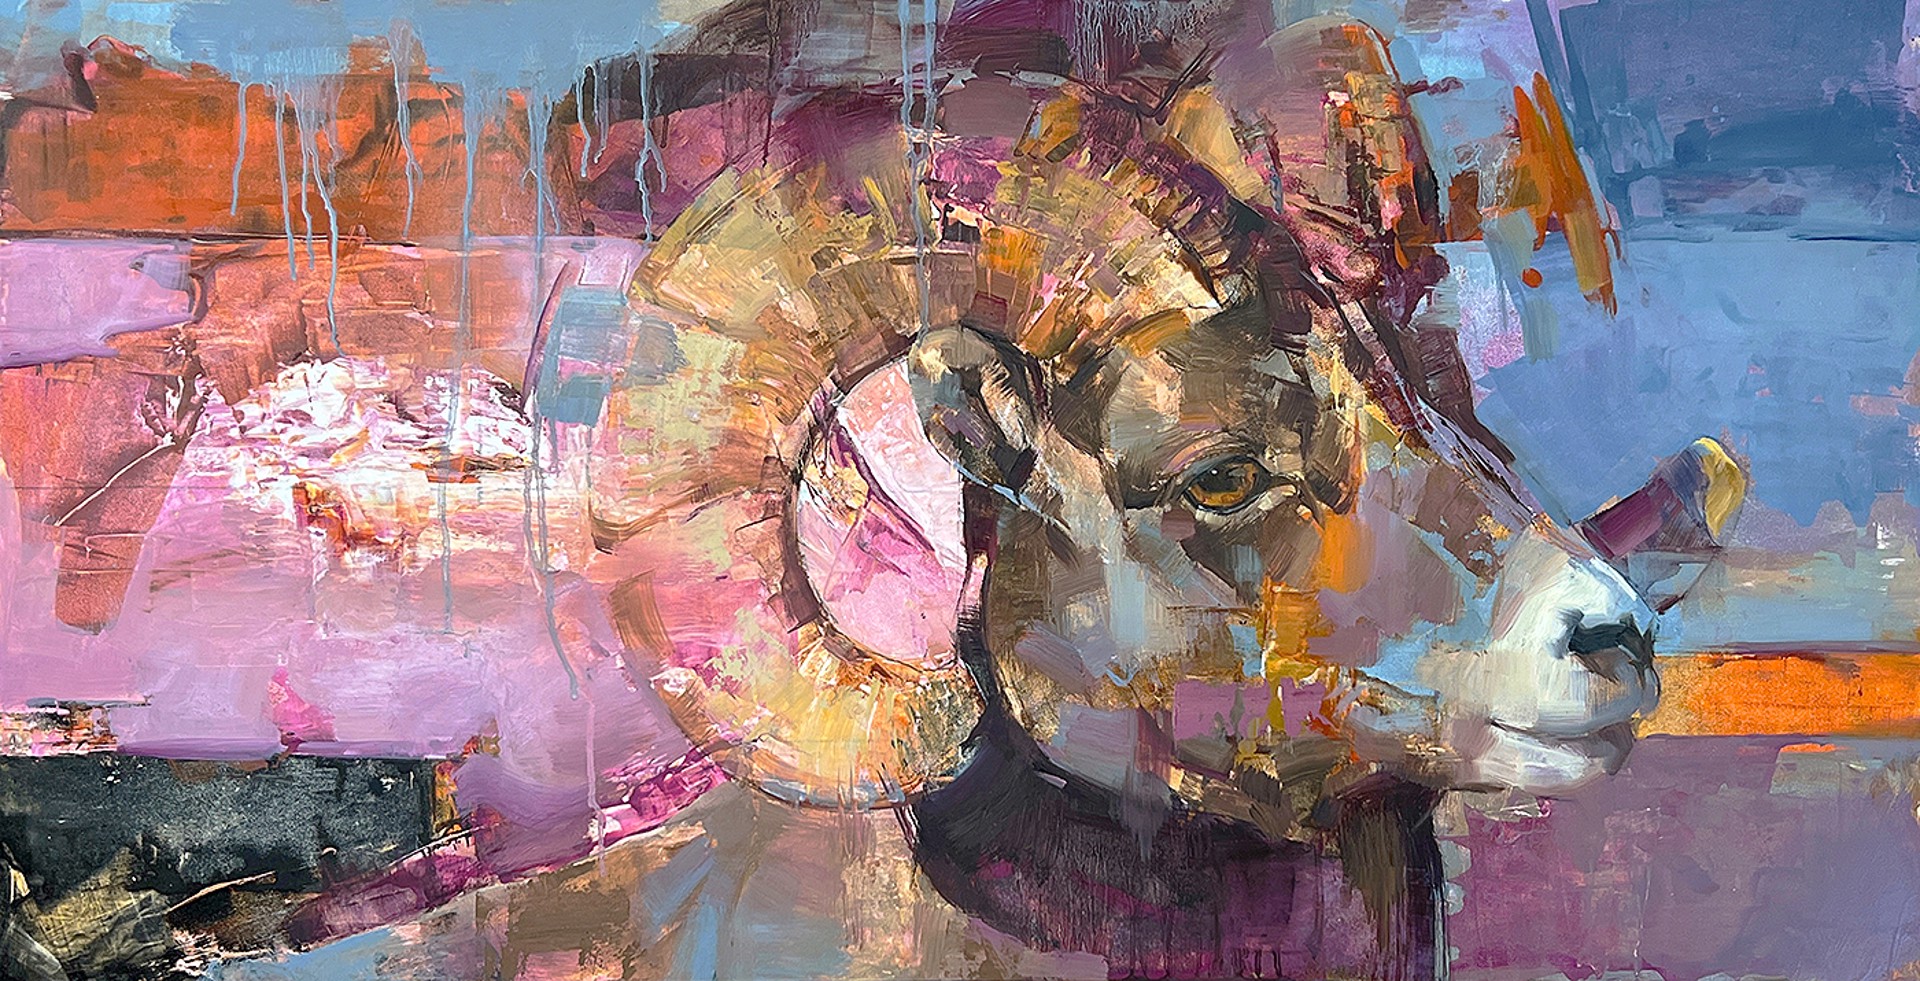 Original Mixed Media Painting Featuring A Big Horn Sheep Painted Expressively Onto Abstract Background In Pinks And Blues